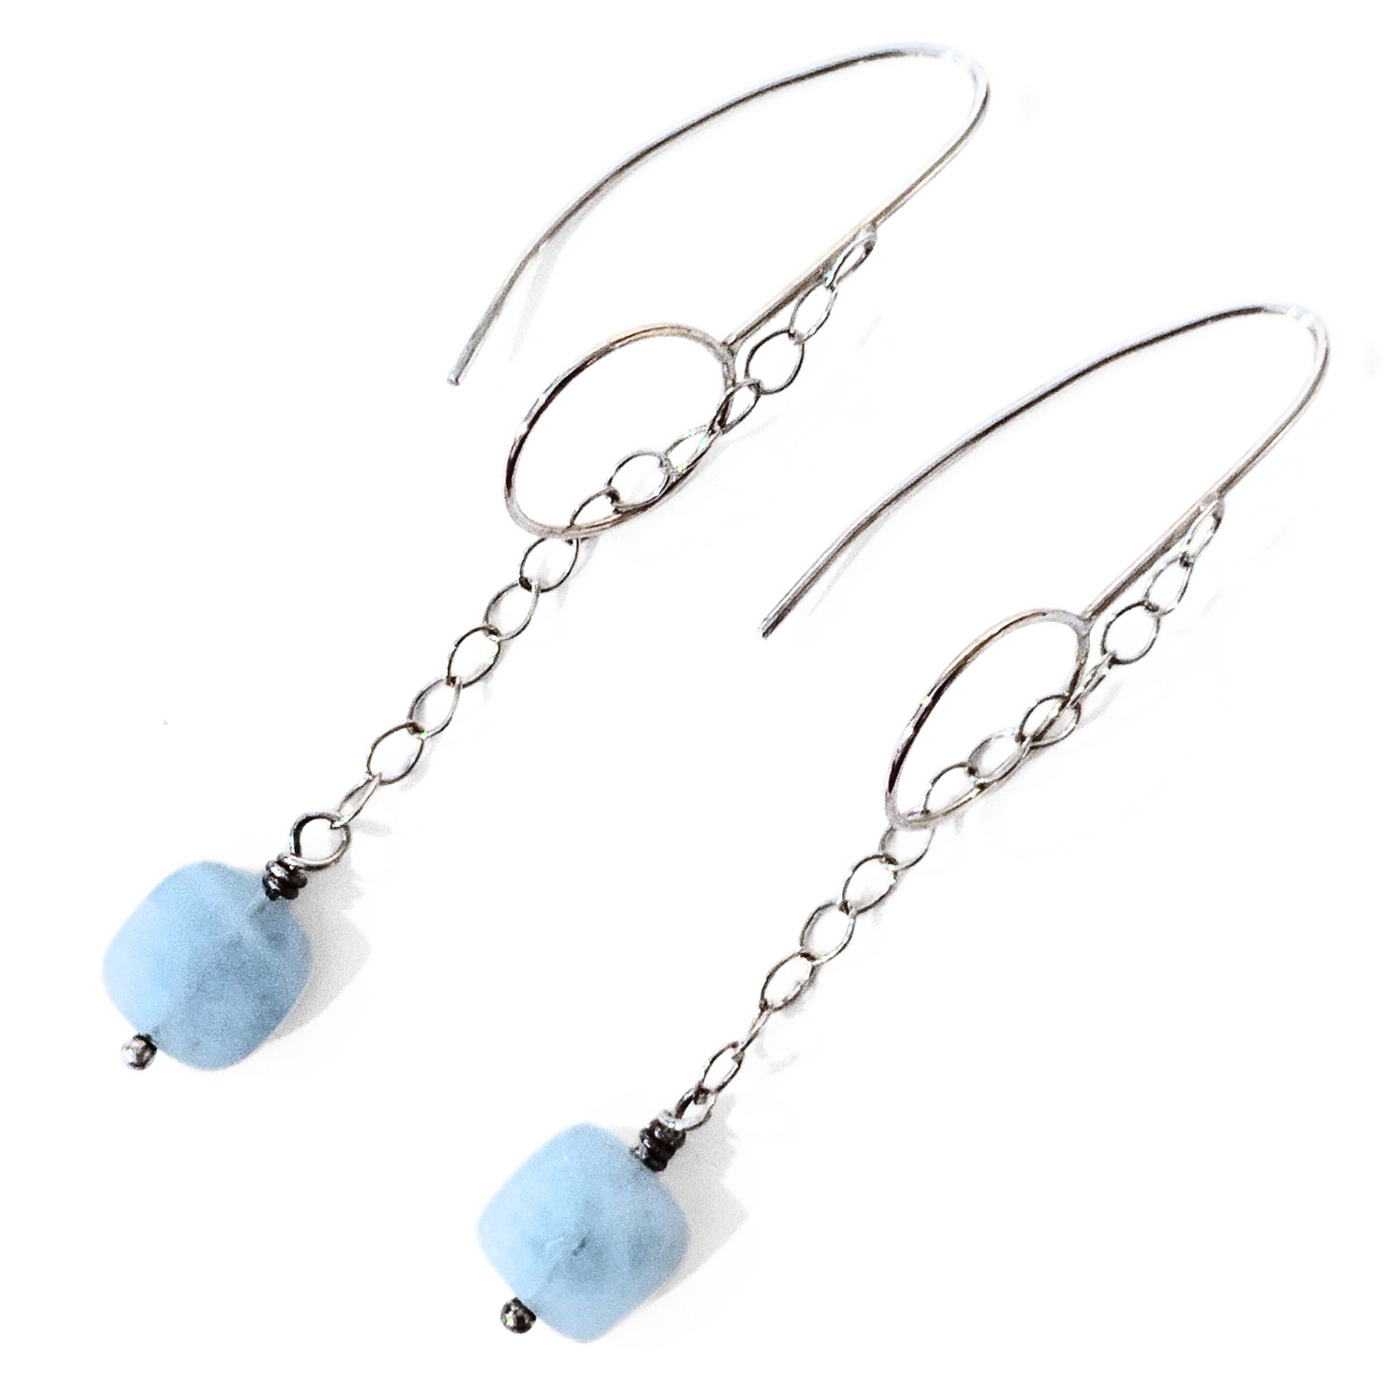 JSD-1024 Sterling Silver Chain Earrings with Aquamarine